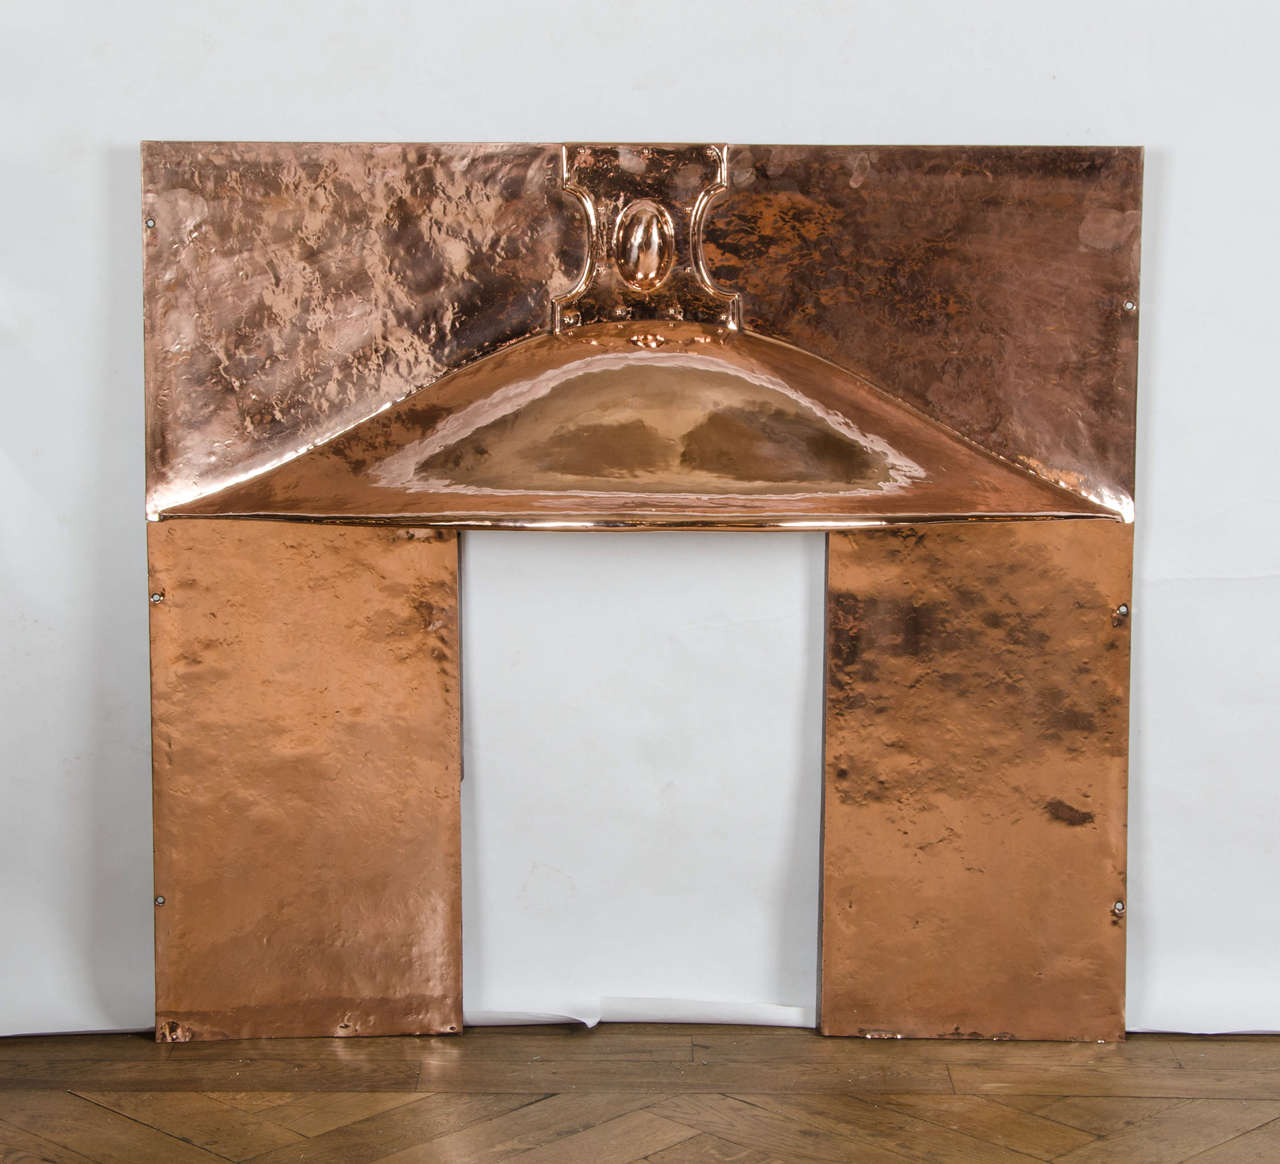 A beautiful original fireplace insert in polished copper. This antique Arts & Crafts insert has a simple design with a sweeping hood and a cartouche motif in the centre. The copper has a hammered finish giving a handmade feel.